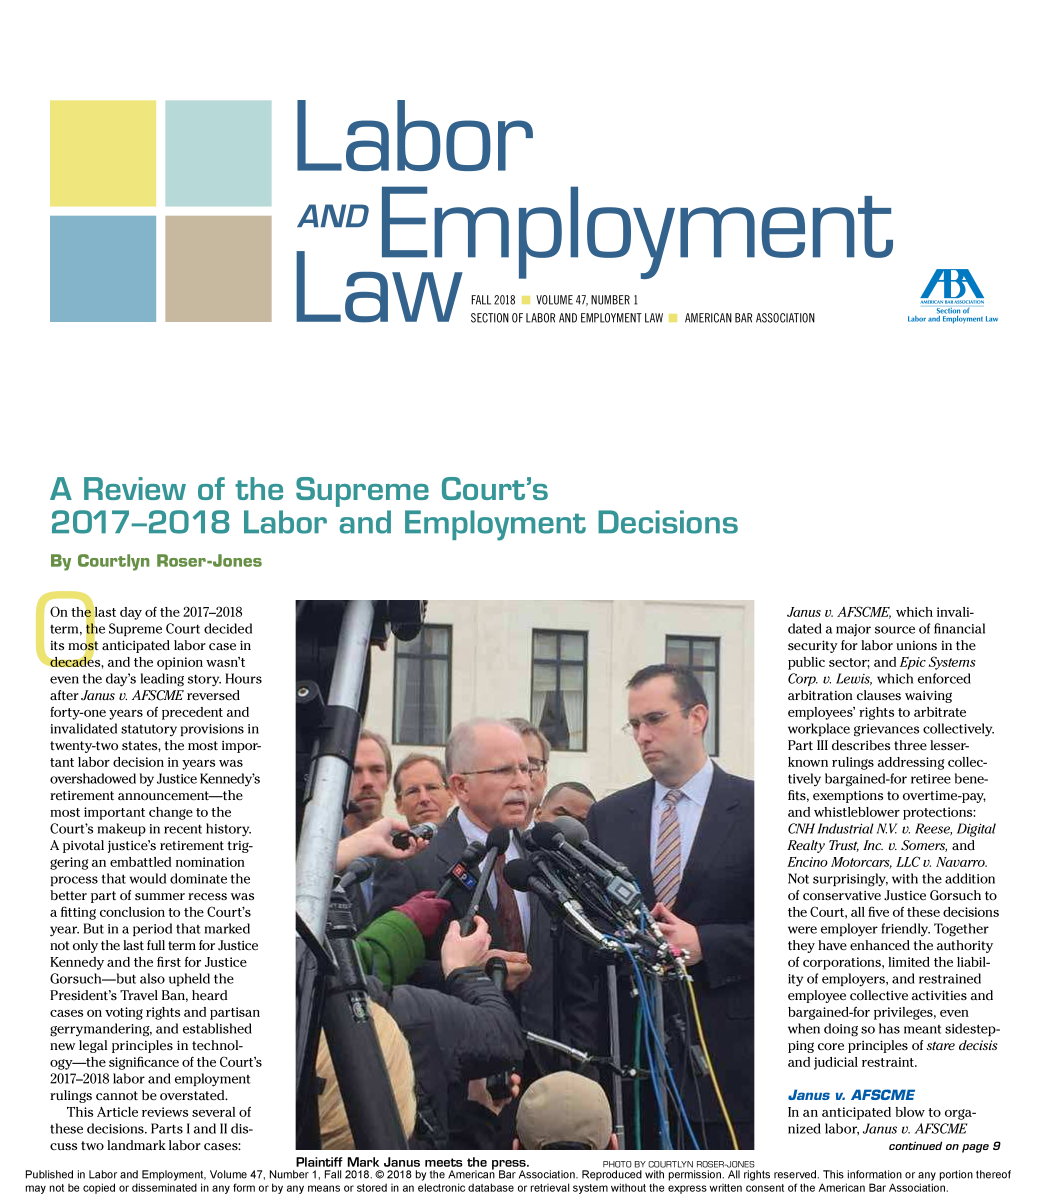 handle is hein.journals/laboemplo47 and id is 1 raw text is: 










Laor


AND Employmen

        I ~U  U


W           FALL 2018 VOLUME 47, NUMBER 1
            SECTION OF LABOR AND EMPLOYMENT LAW


AMERICAN BAR ASSOCIATION


By  Courtlyn RoserJones


On the last day of the 2017-2018
term, the Supreme Court decided
its most anticipated labor case in
decades, and the opinion wasn't
even the day's leading story. Hours
after Janus v. AFSCME reversed
forty-one years of precedent and
invalidated statutory provisions in
twenty-two states, the most impor-
tant labor decision in years was
overshadowed by Justice Kennedy's
retirement announcement-the
most important change to the
Court's makeup in recent history.
A pivotal justice's retirement trig-
gering an embattled nomination
process that would dominate the
better part of summer recess was
a fitting conclusion to the Court's
year. But in a period that marked
not only the last full term for Justice
Kennedy  and the first for Justice
Gorsuch-but   also upheld the
President's Travel Ban, heard
cases on voting rights and partisan
gerrymandering, and established
new legal principles in technol-
ogy-the  significance of the Court's
2017-2018 labor and employment
rulings cannot be overstated.
   This Article reviews several of
these decisions. Parts I and II dis-
cuss two landmark labor cases:


Janus v. AFSCME, which invali-
dated a major source of financial
security for labor unions in the
public sector; and Epic Systems
Corp. v. Lewis, which enforced
arbitration clauses waiving
employees' rights to arbitrate
workplace grievances collectively.
Part III describes three lesser-
known  rulings addressing collec-
tively bargained-for retiree bene-
fits, exemptions to overtime-pay,
and whistleblower protections:
CNH  Industrial N V v. Reese, Digital
Realty Trust, Inc. v. Somers, and
Encino Motorcars, LLC v. Navarro.
Not surprisingly, with the addition
of conservative Justice Gorsuch to
the Court, all five of these decisions
were employer friendly. Together
they have enhanced the authority
of corporations, limited the liabil-
ity of employers, and restrained
employee  collective activities and
bargained-for privileges, even
when  doing so has meant sidestep-
ping core principles of stare decisis
and judicial restraint.

Janus  v. AFSCME
In an anticipated blow to orga-
nized labor, Janus v. AFSCME
               continued on page 9


                                         Plaintiff Mark Janus meets the press.         PHOTO BY COURTLYN ROSER-JONES
Published in Labor and Employment, Volume 47, Number 1, Fall 2018. © 2018 by the American Bar Association. Reproduced with permission. All rights reserved. This information or any portion thereof
may not be copied or disseminated in any form or by any means or stored in an electronic database or retrieval system without the express written consent of the American Bar Association.


   Secino
LArand Emploment La


